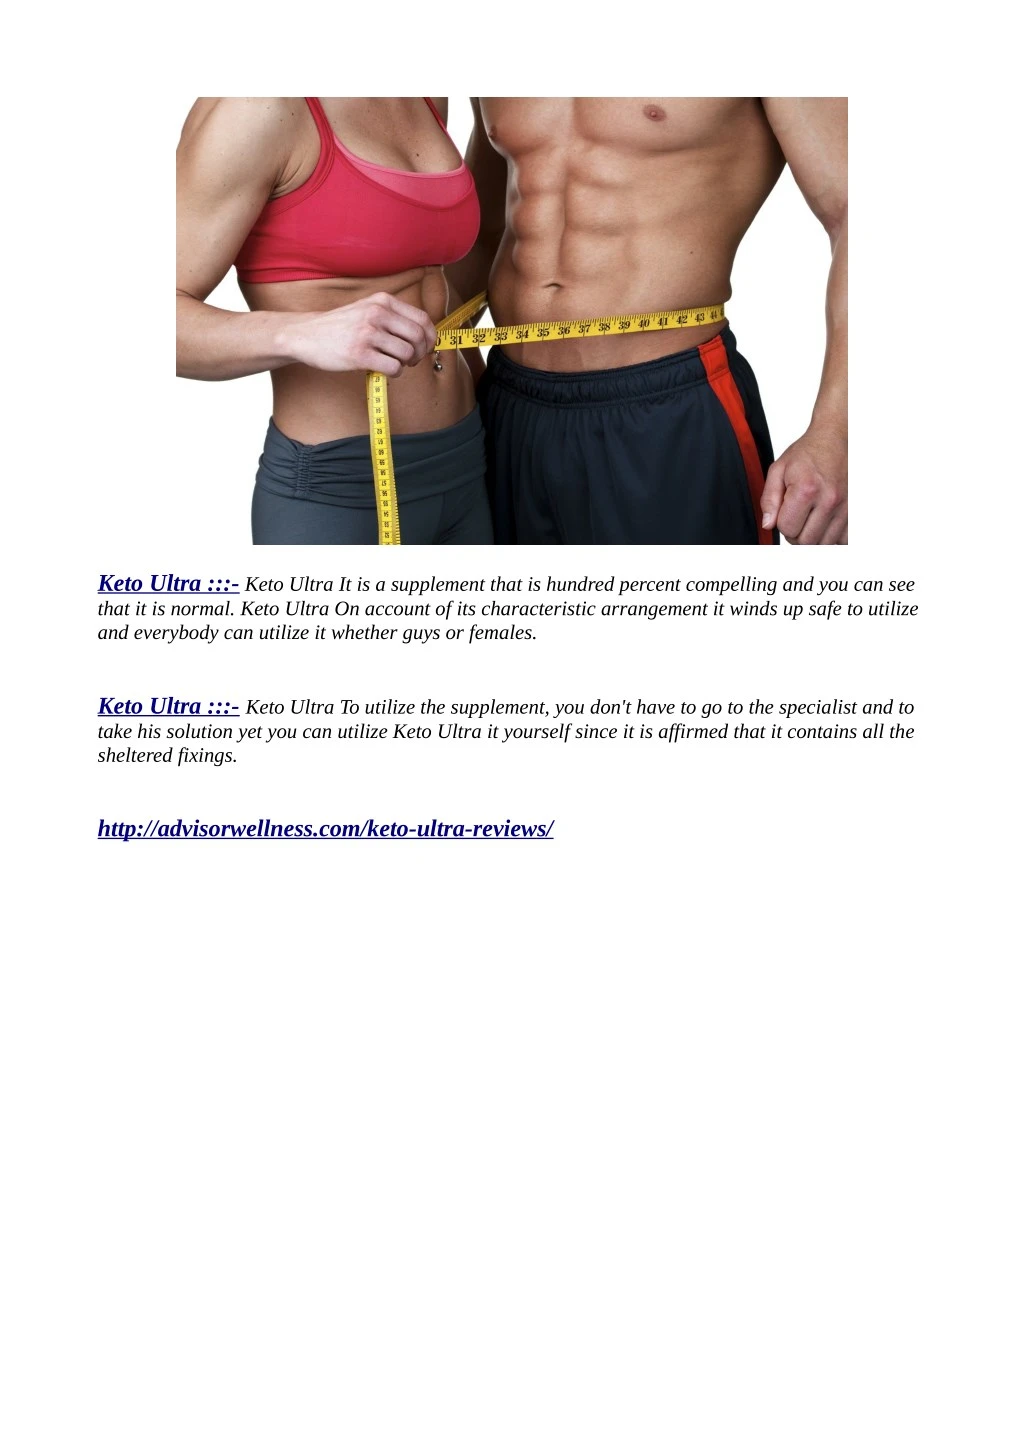 keto ultra keto ultra it is a supplement that